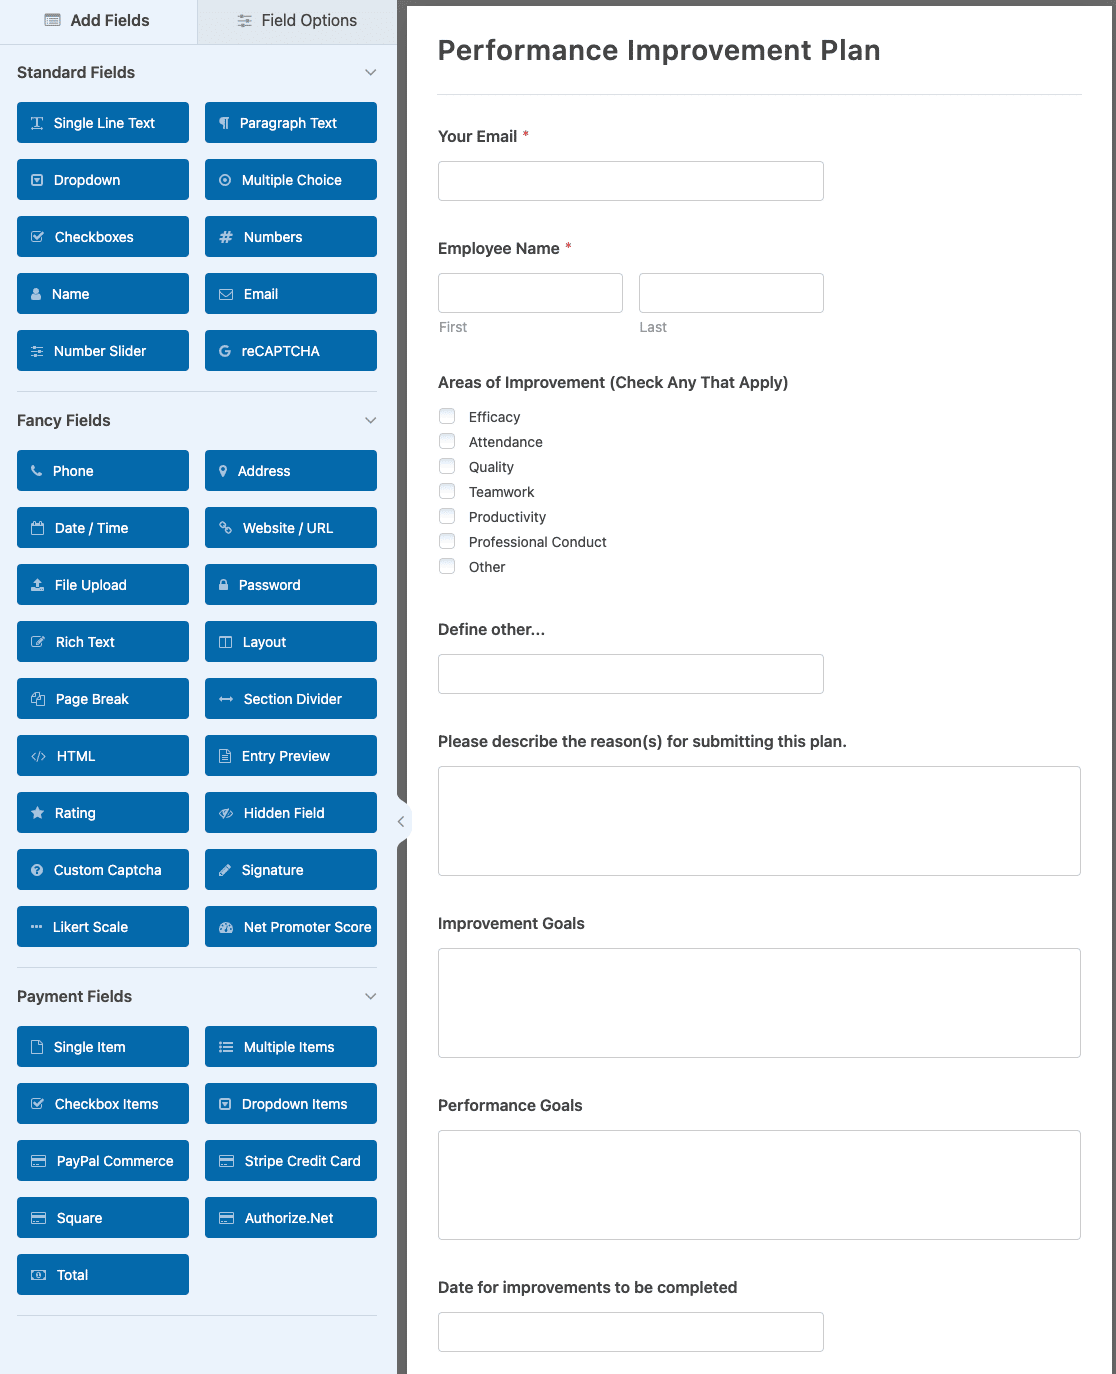 The Performance Improvement Plan Form template in the form builder